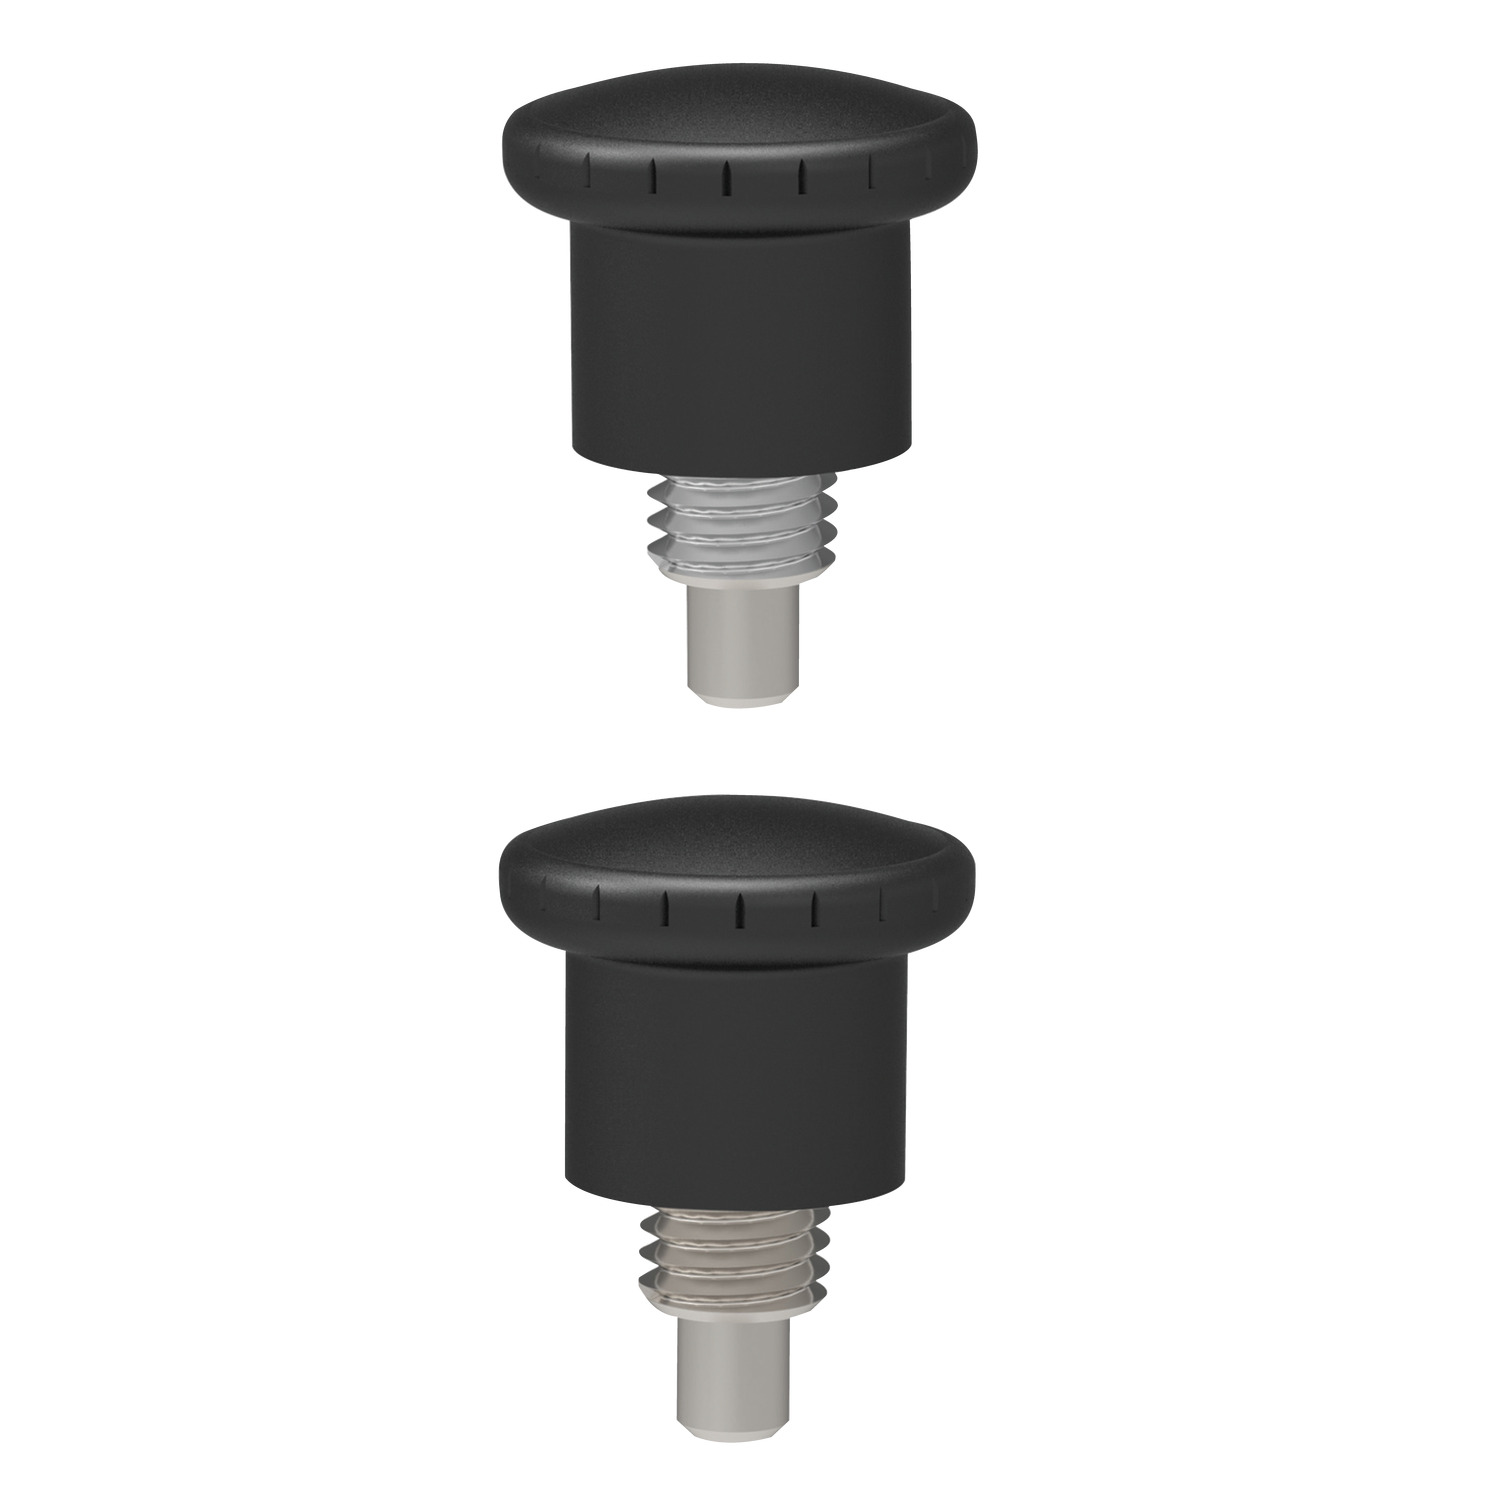 Index Plungers - Pull Grip Ideal for smaller and lighter location requirements or those with thin materials. To learn more about our index plungers, visit this page.